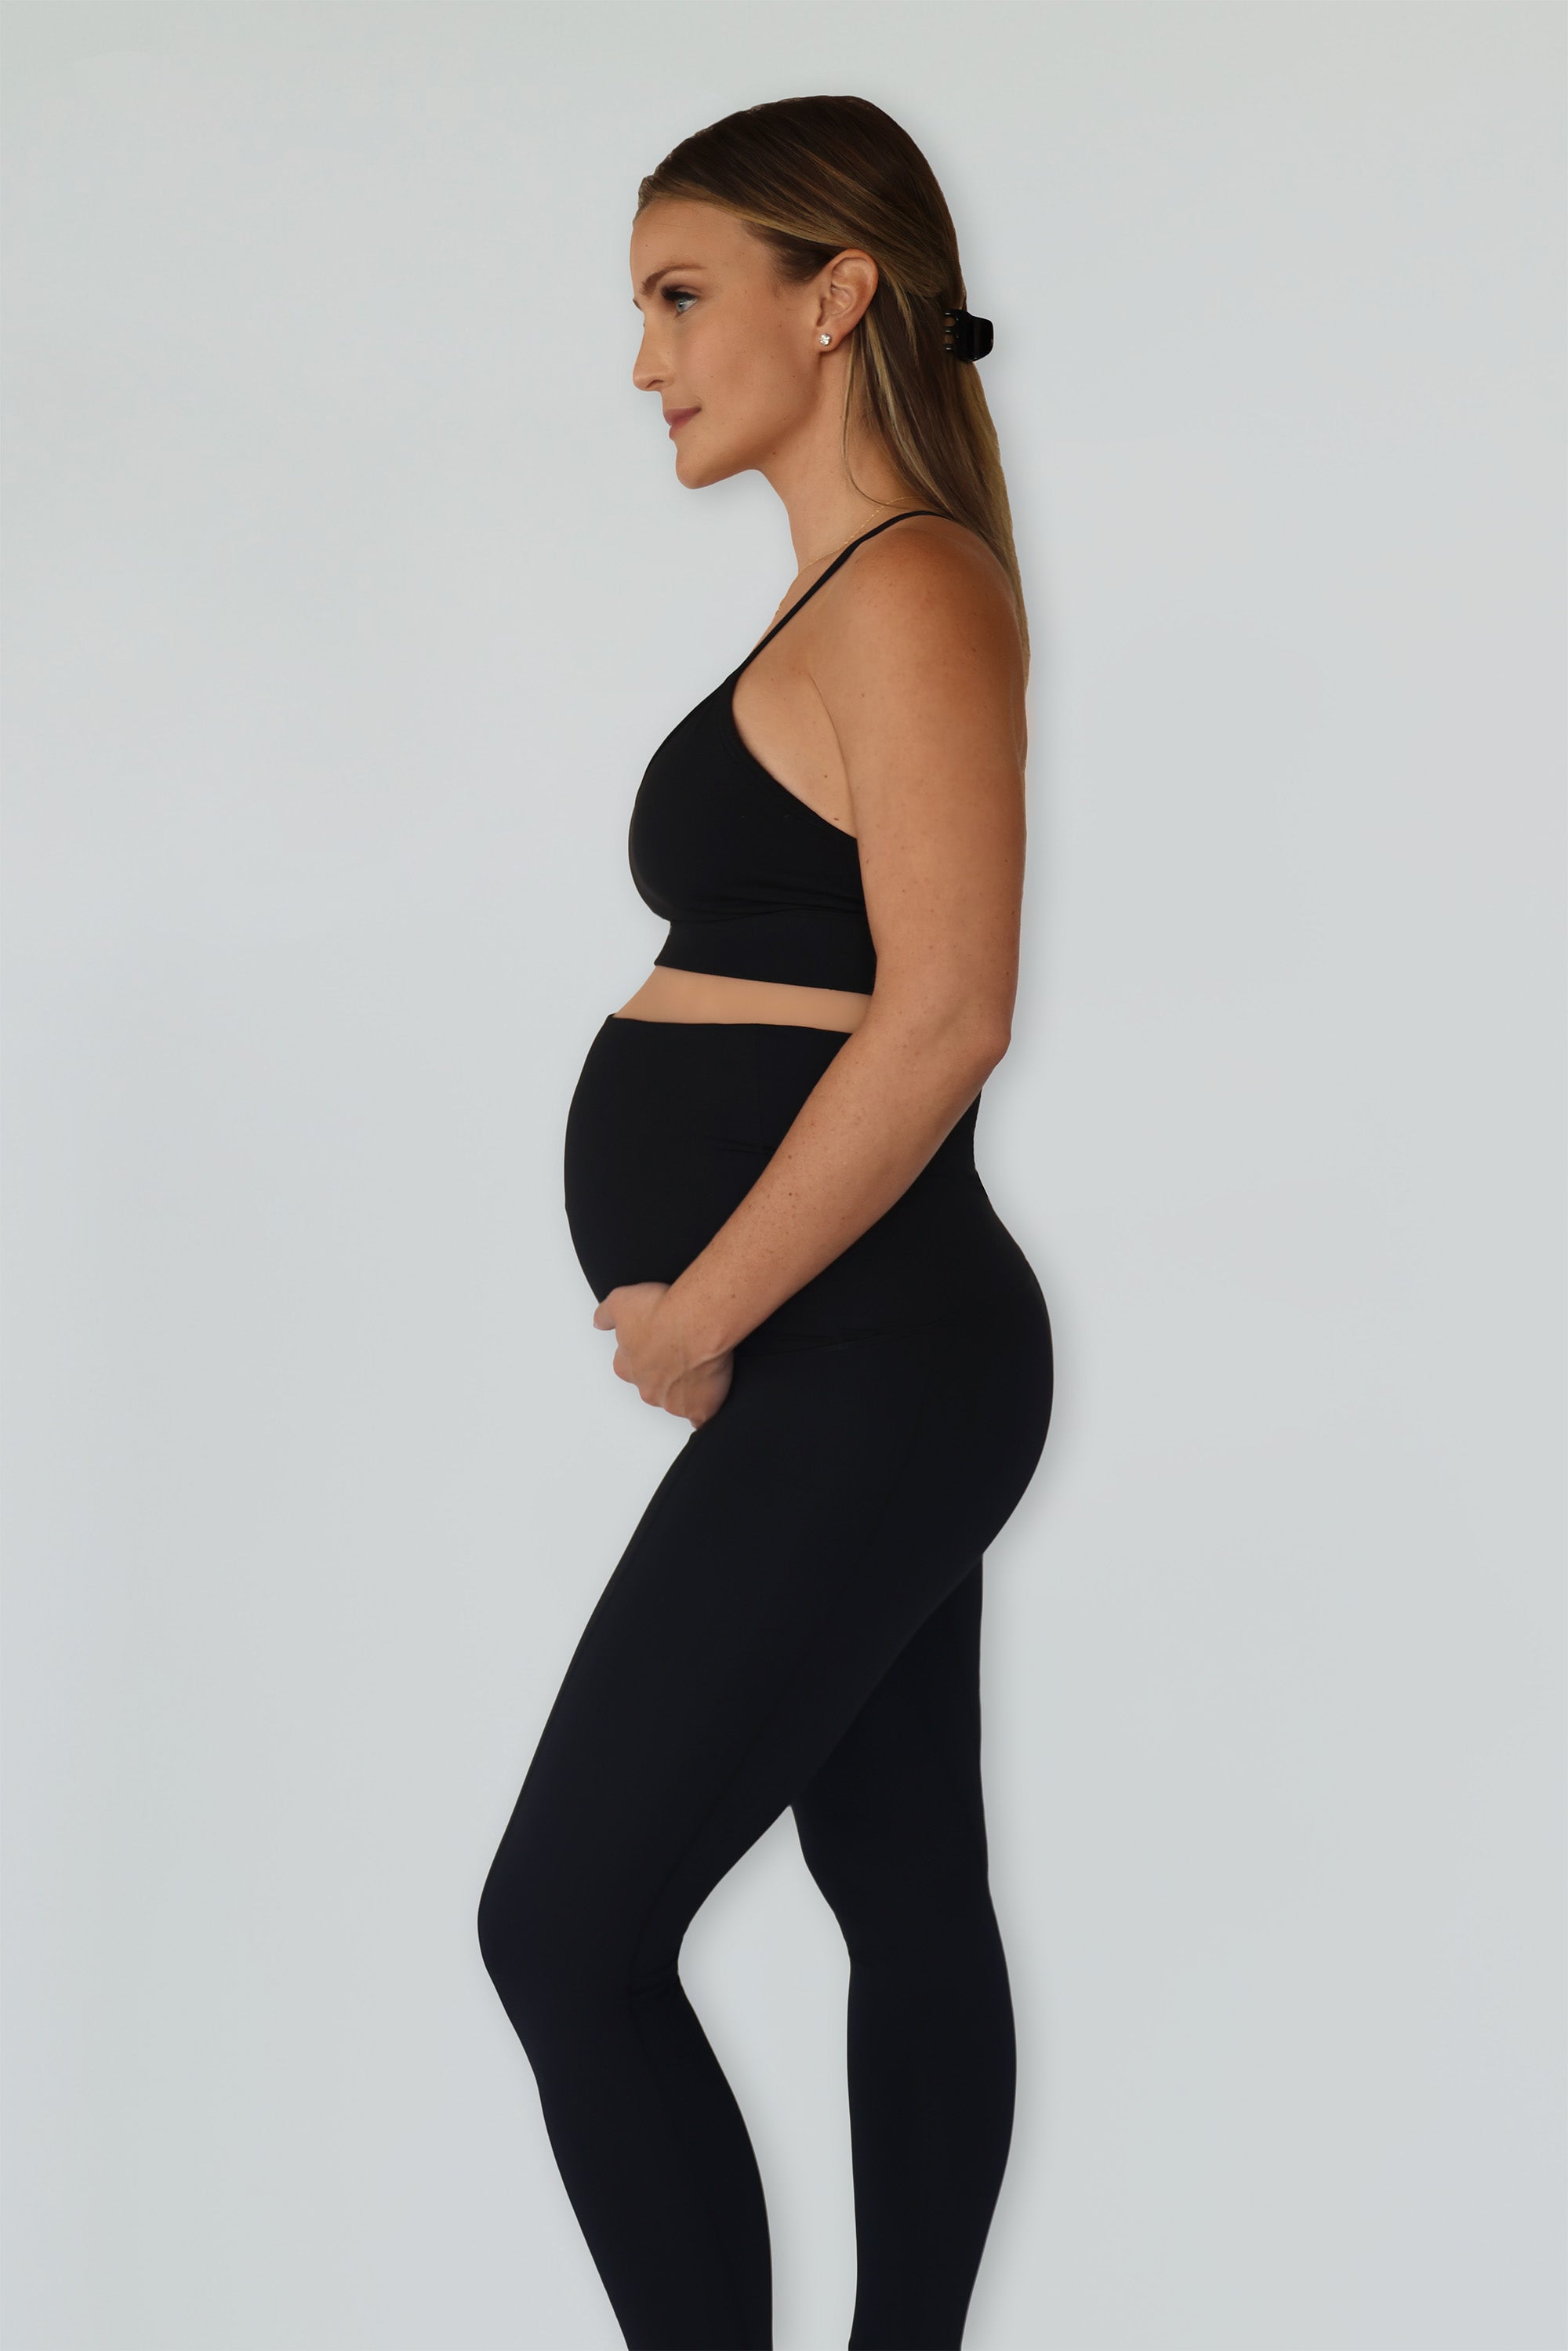 3 Ways to Choose Maternity Pants - wikiHow